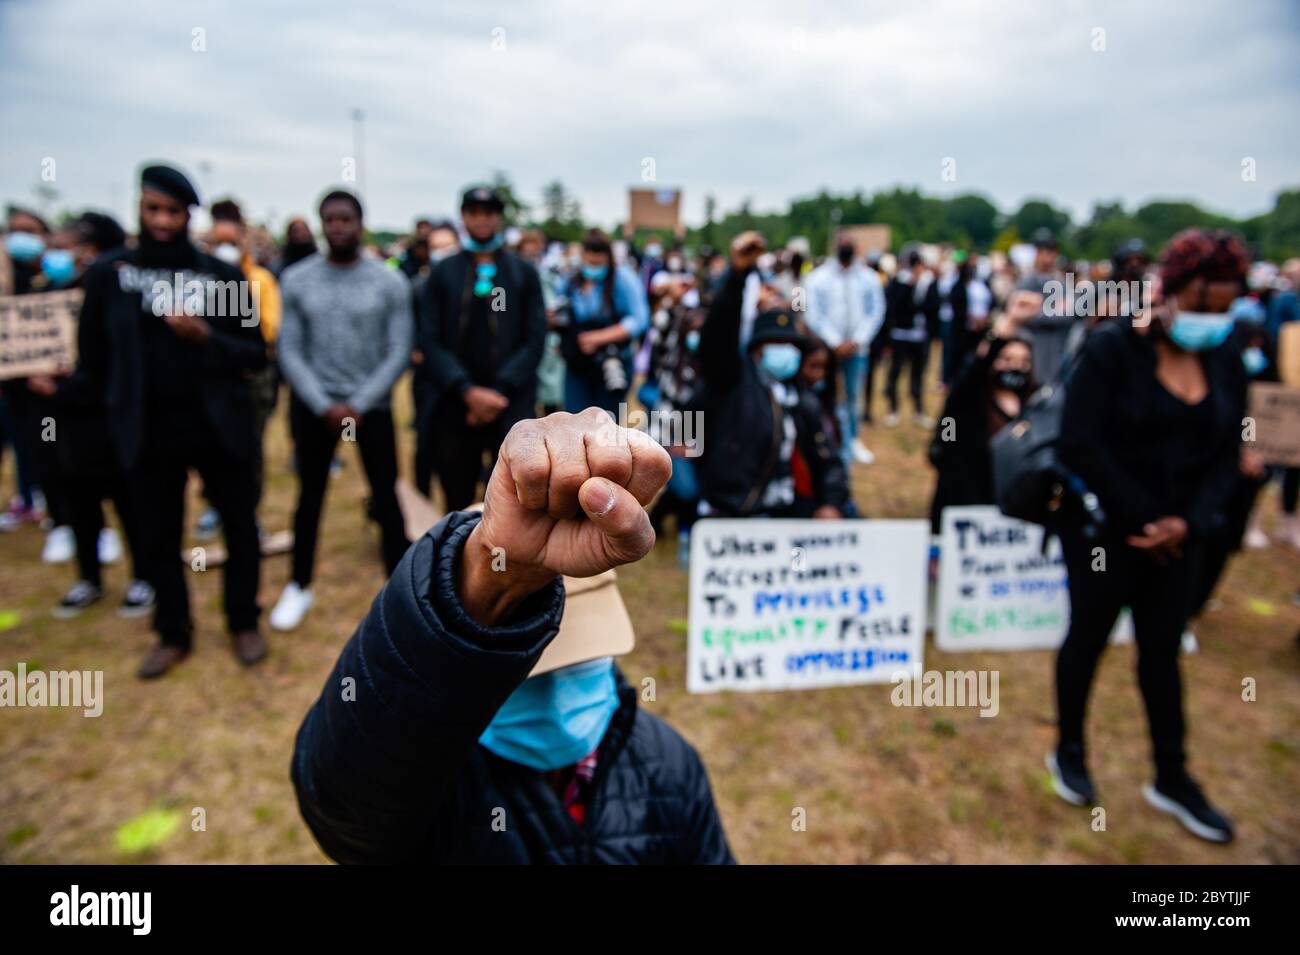 A man is seen taking a knee during the demonstration.Thousands of people gathered at the Nelson Mandela Park to protest against police brutality and racism which is an initiative of residents of the Bijlmer district, the largest population of Afro-Dutch people in Amsterdam. The black community has been a victim of oppression for decades since the 1990s. Stock Photo